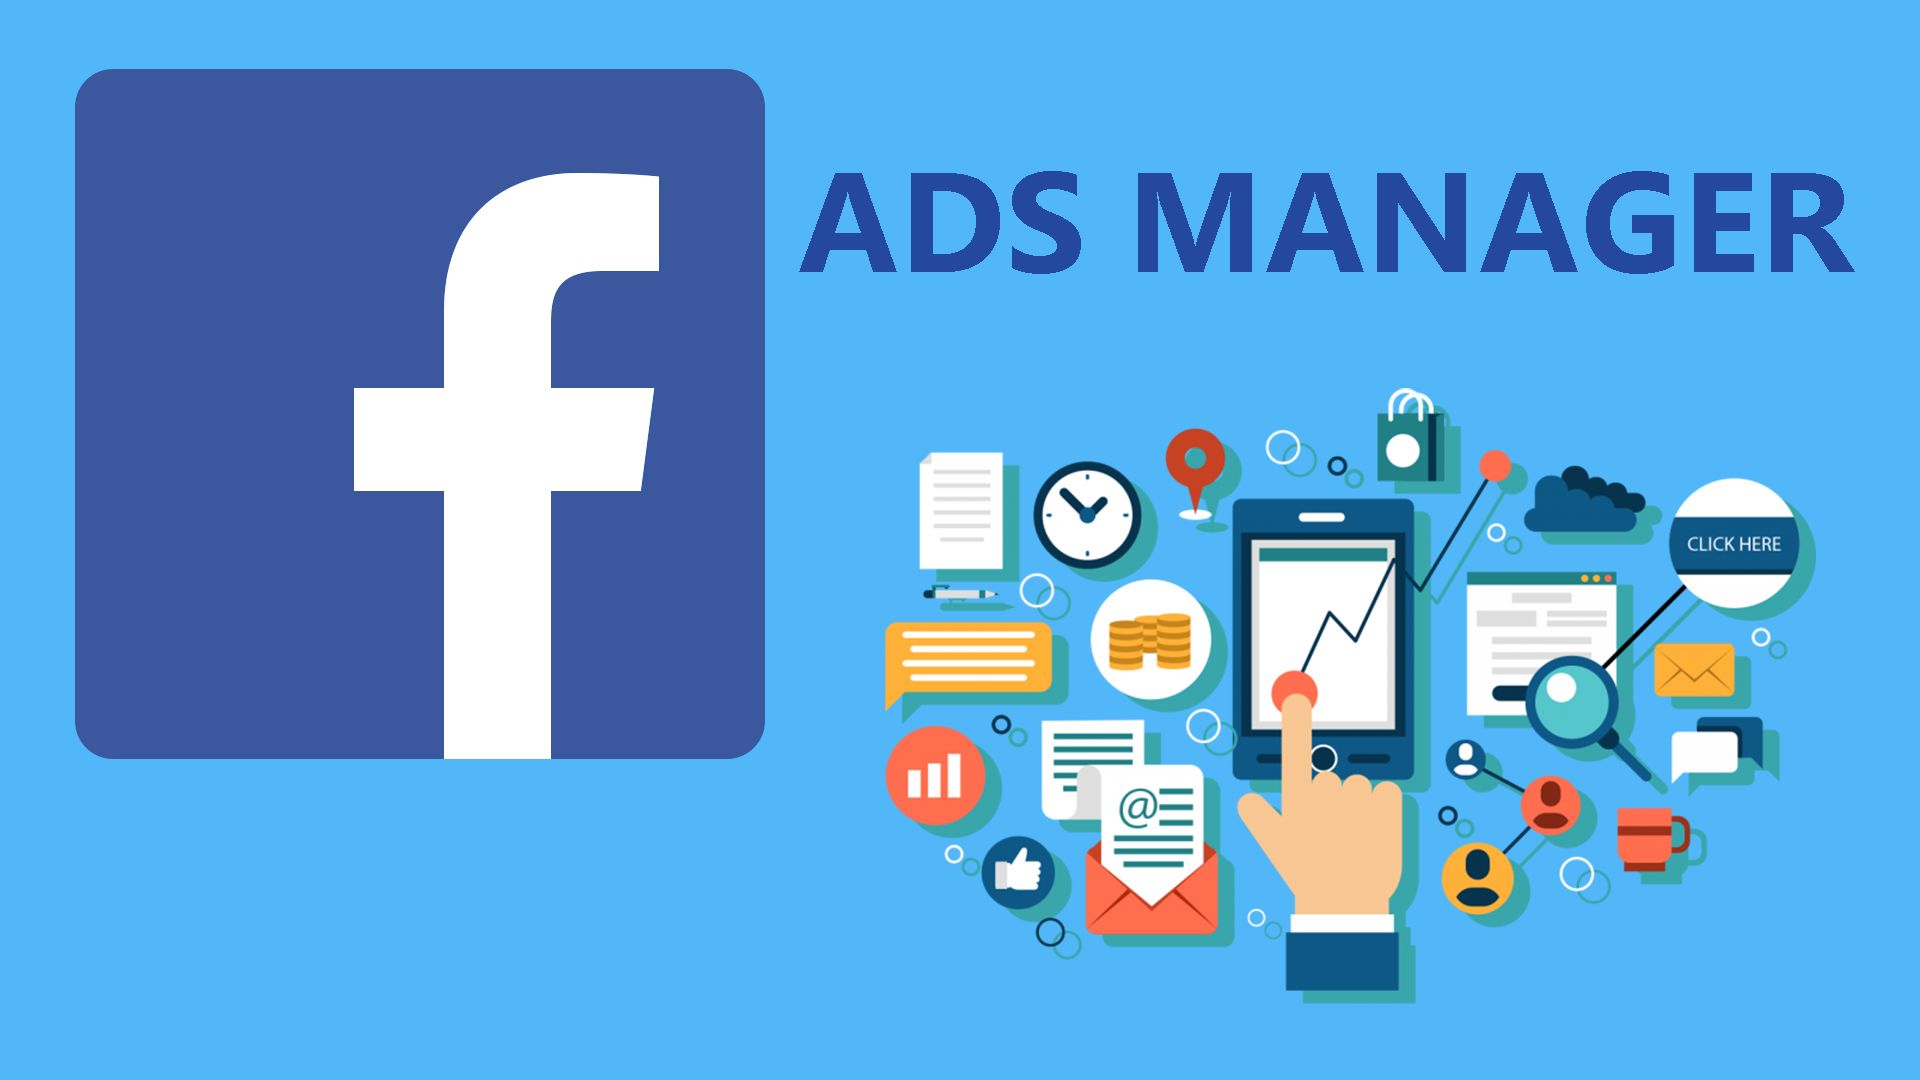 In this article, we are going to be covering how to fix Facebook Ads Manager not working, so you can keep using this very effective marketing tool.